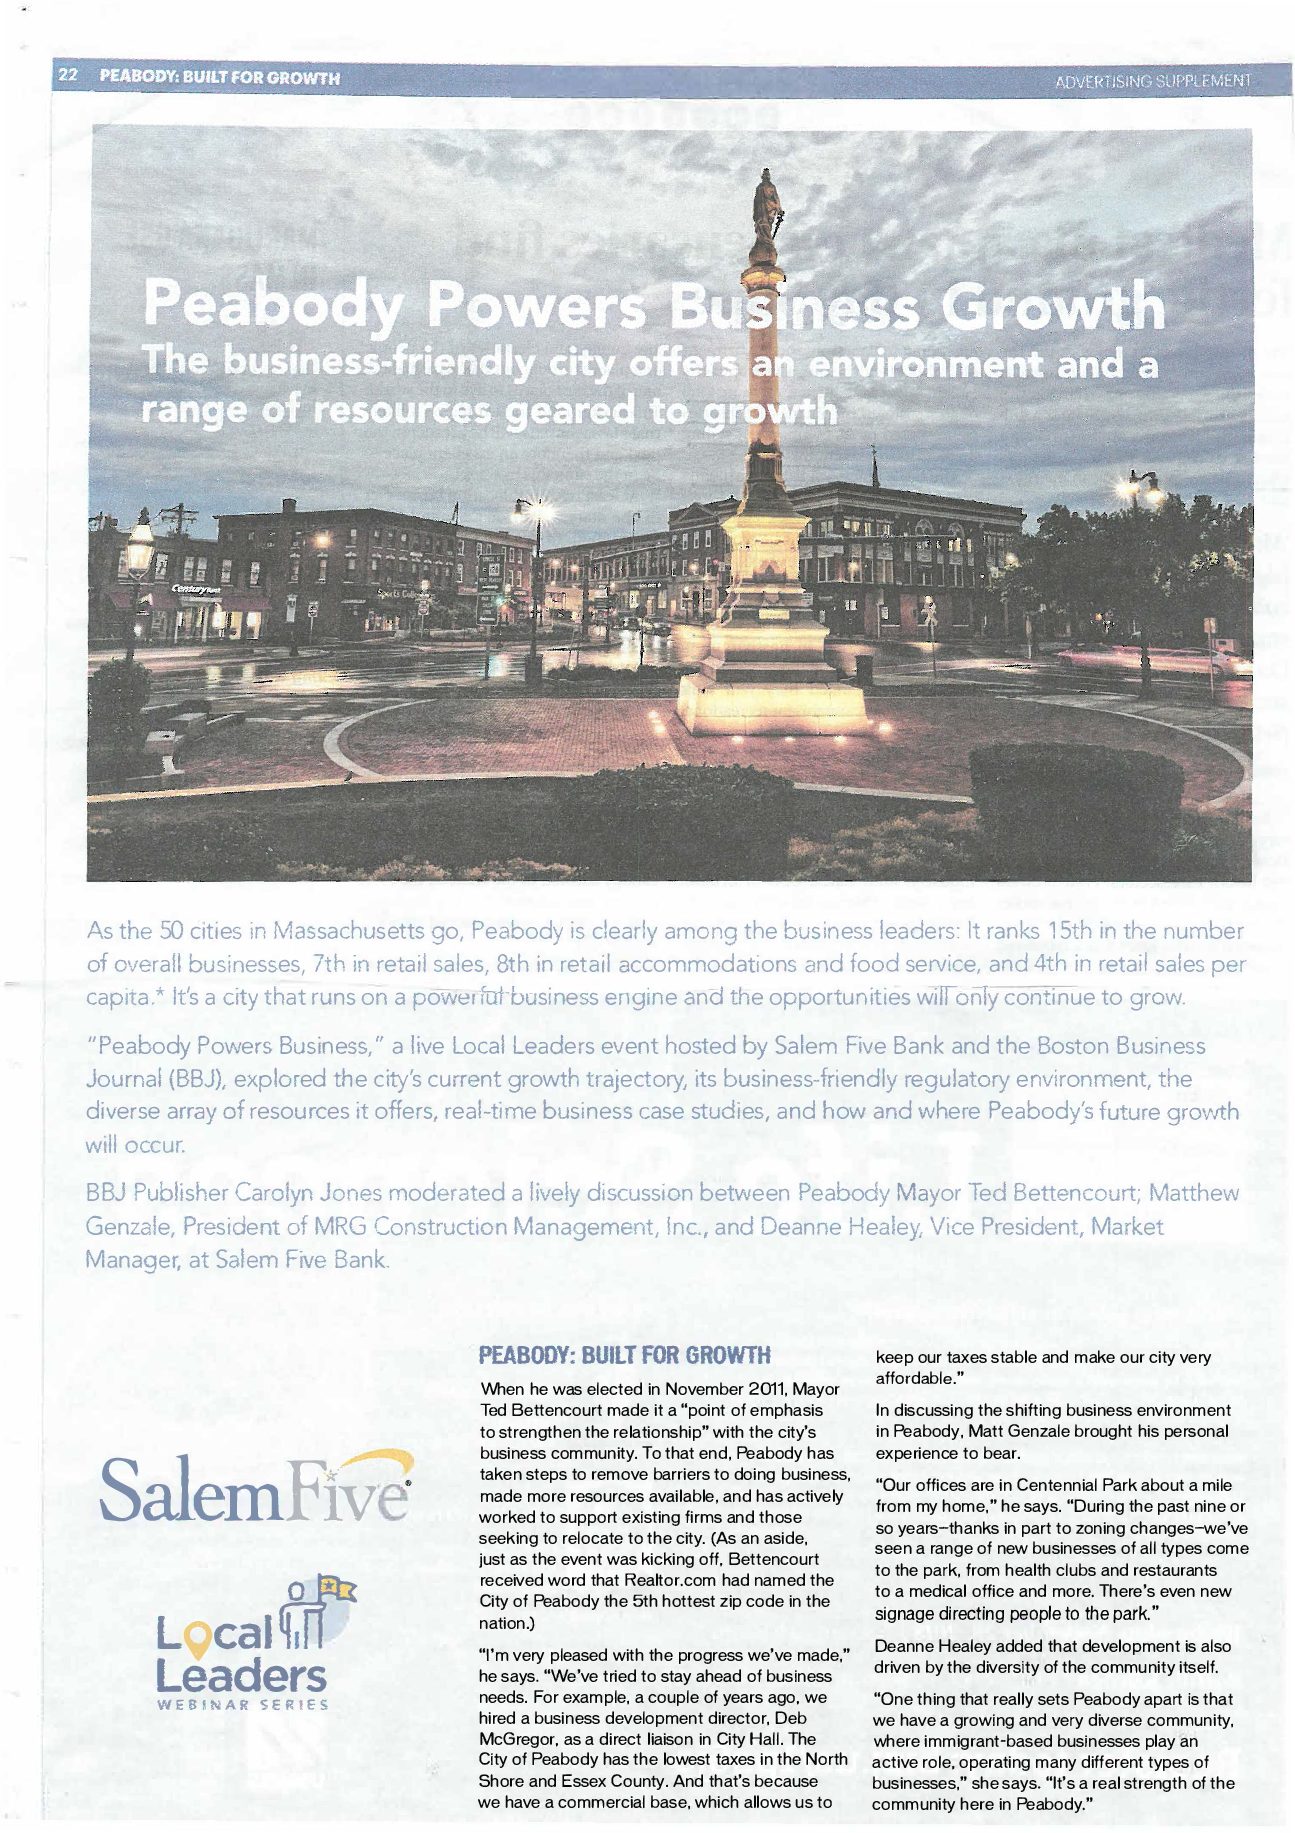 Peabody Powers Business Growth